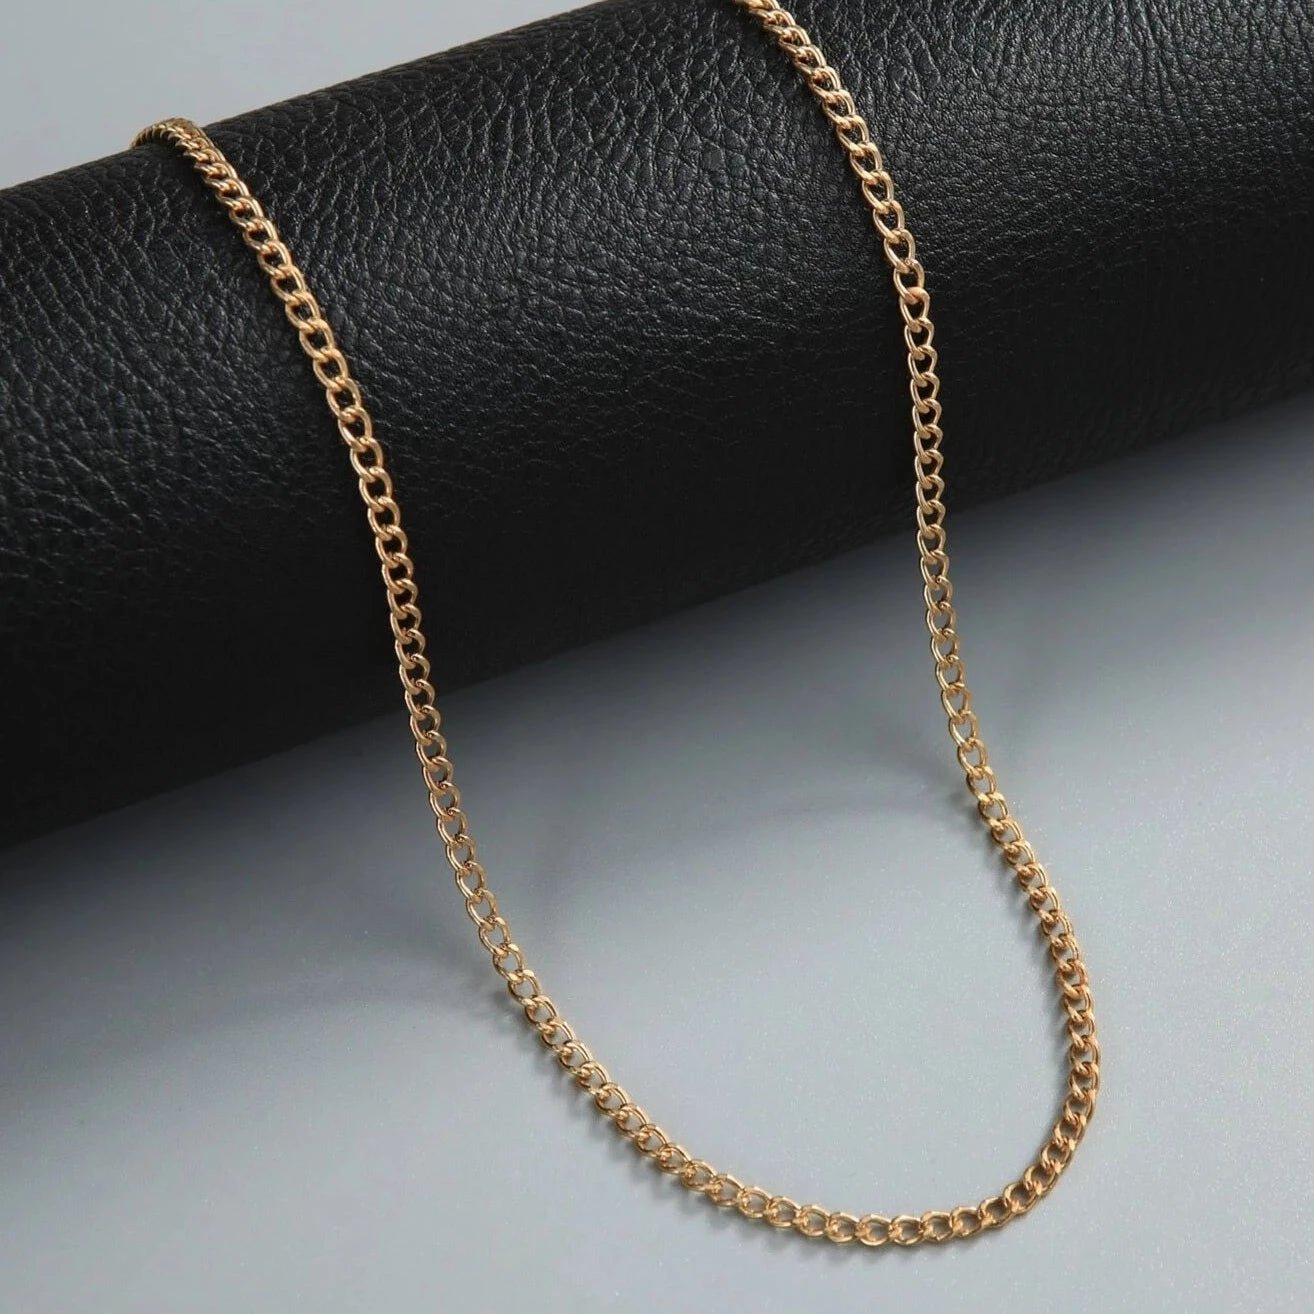 6MM STAINLESS STEEL CURB CHAIN NECKLACE - IceGlint